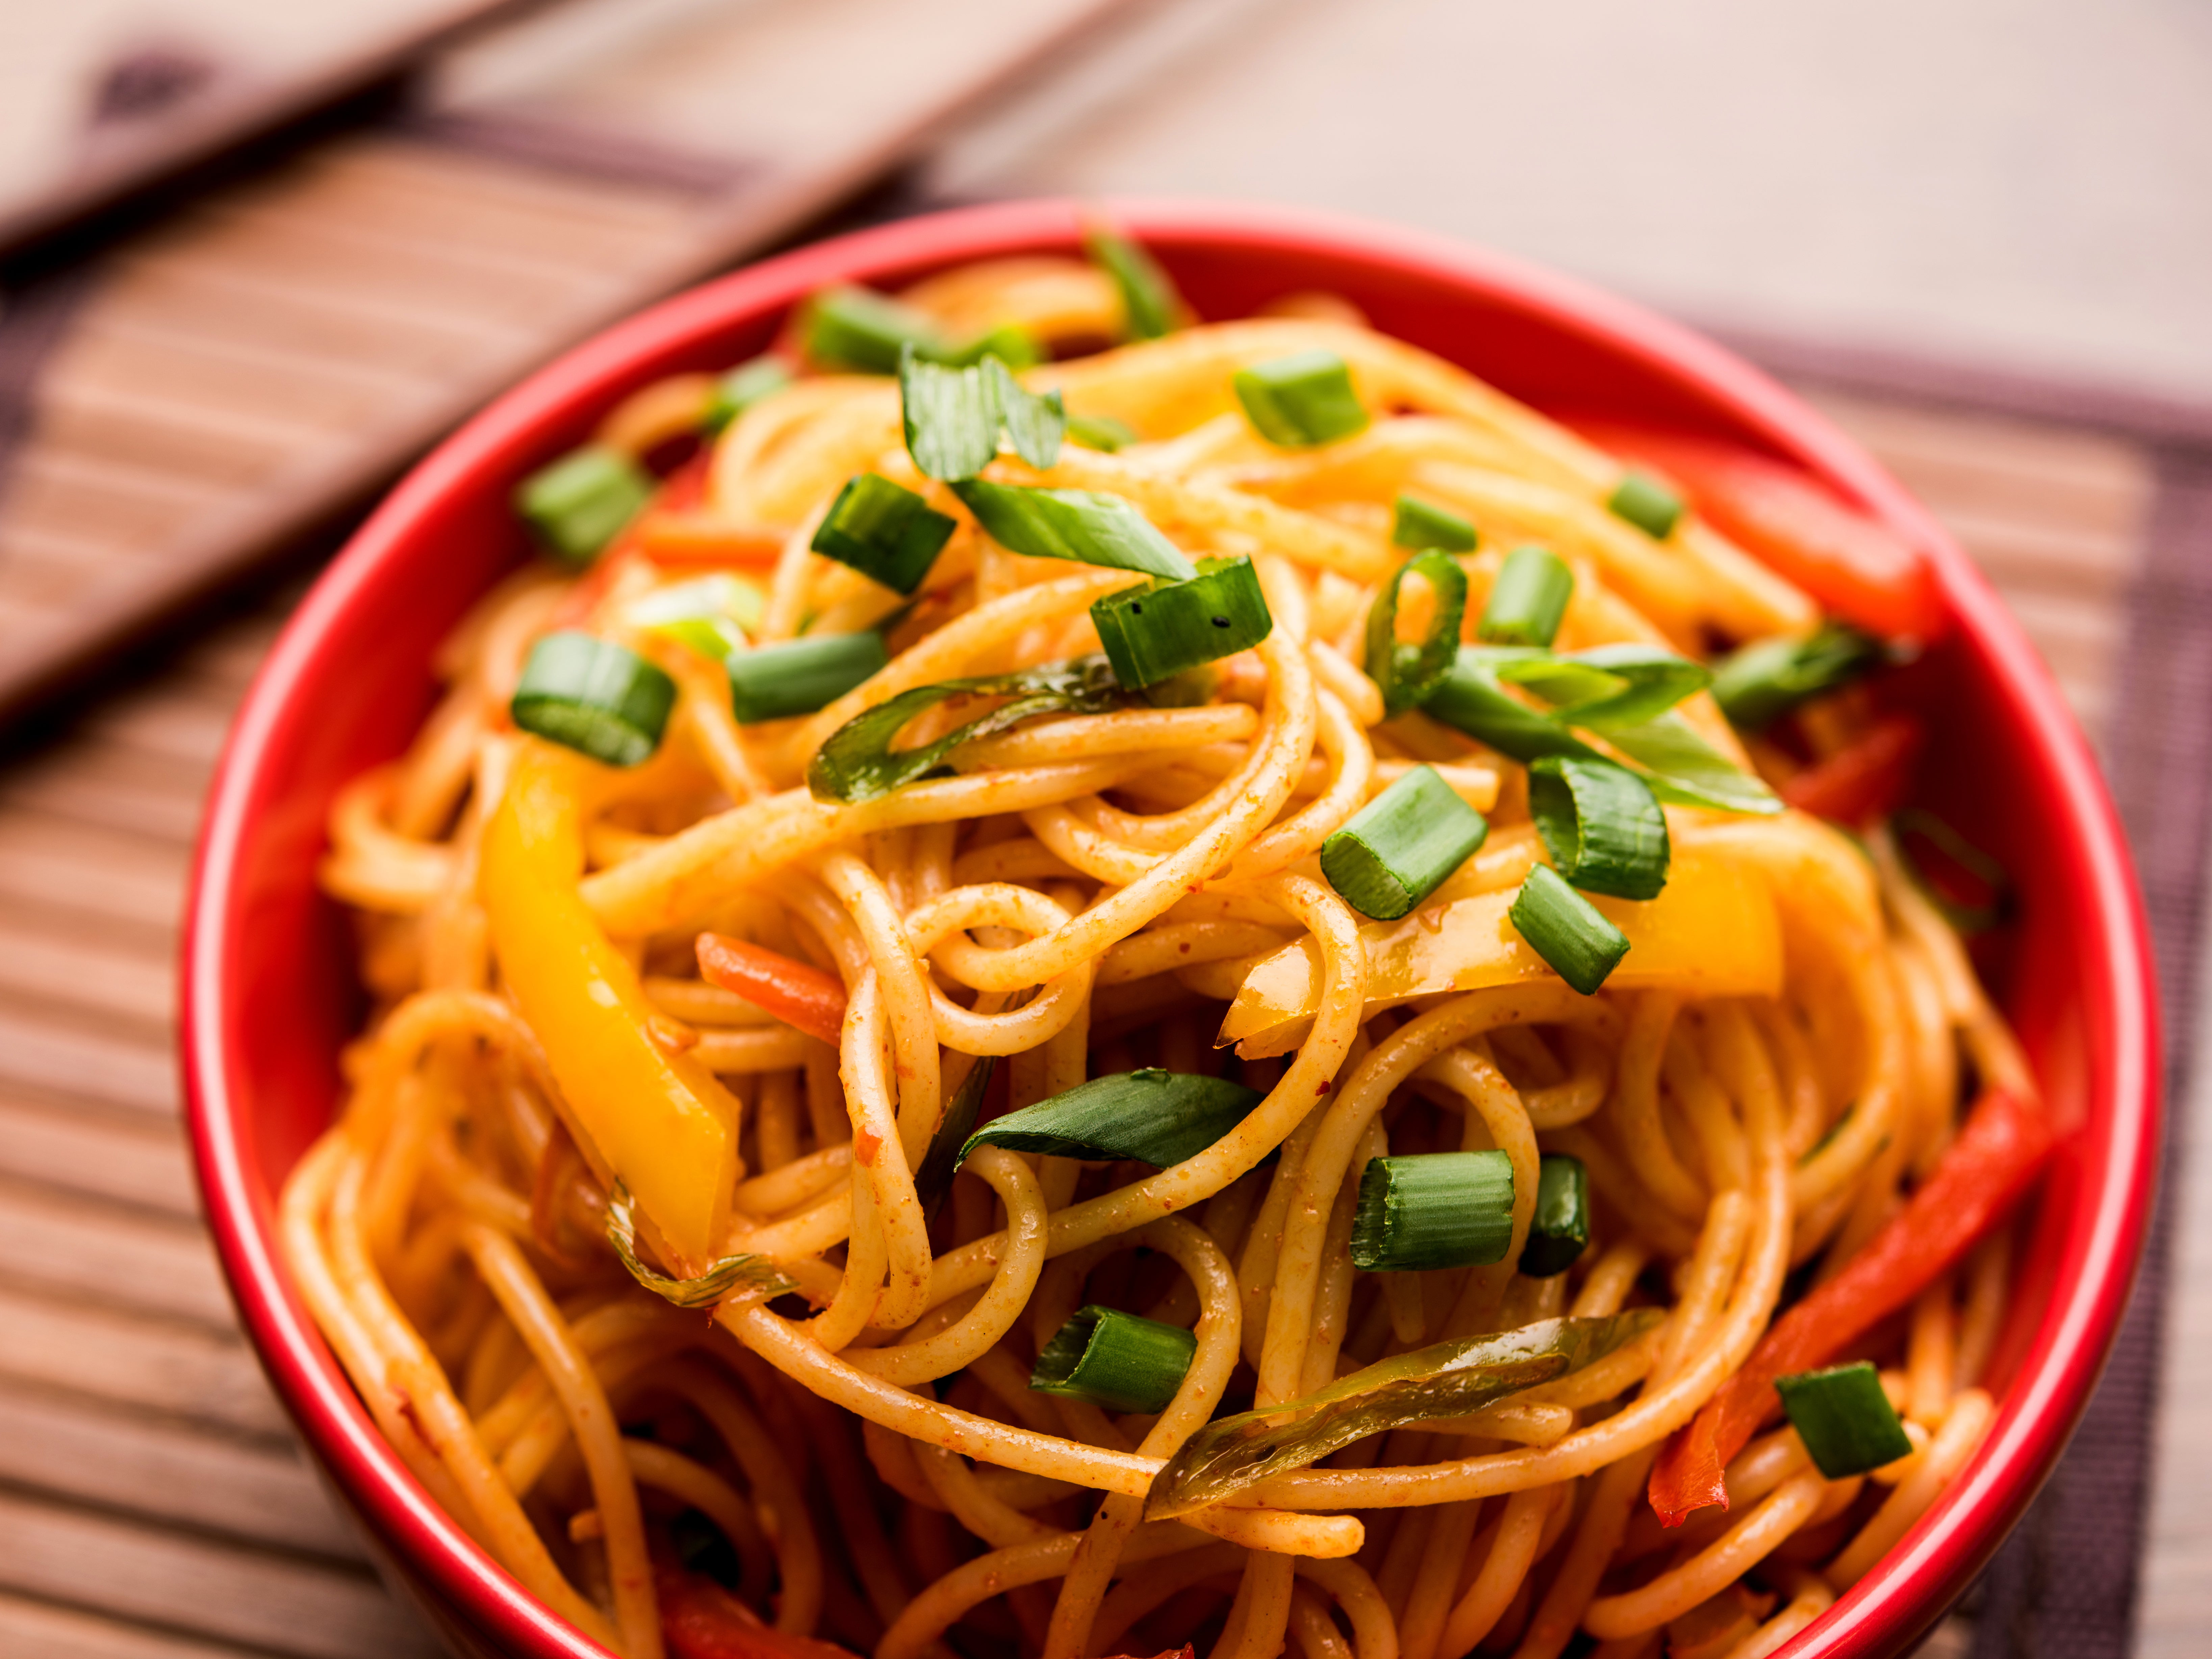 An adaptable noodle dish makes dinner for everyone easy and speedy